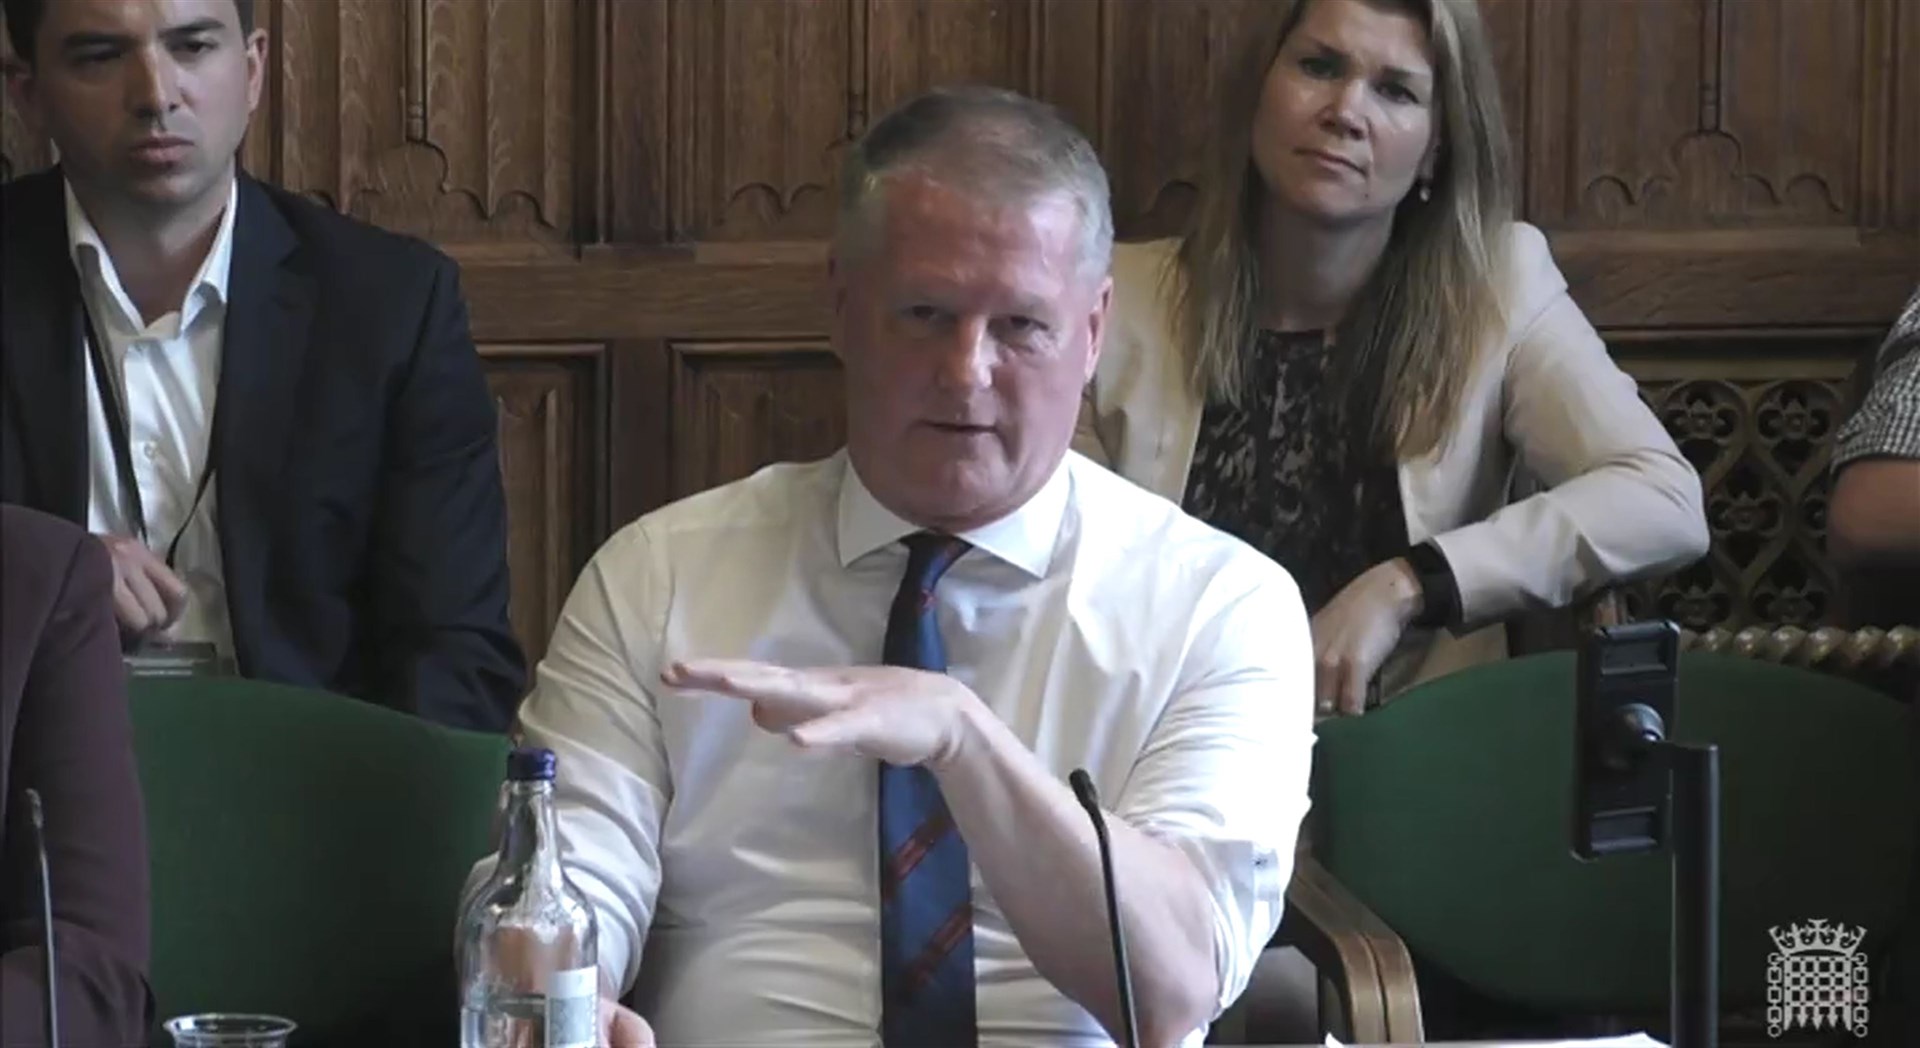 David Potts, CEO of Morrisons, appearing before the Business and Trade Committee (House of Commons/UK Parliament/PA)